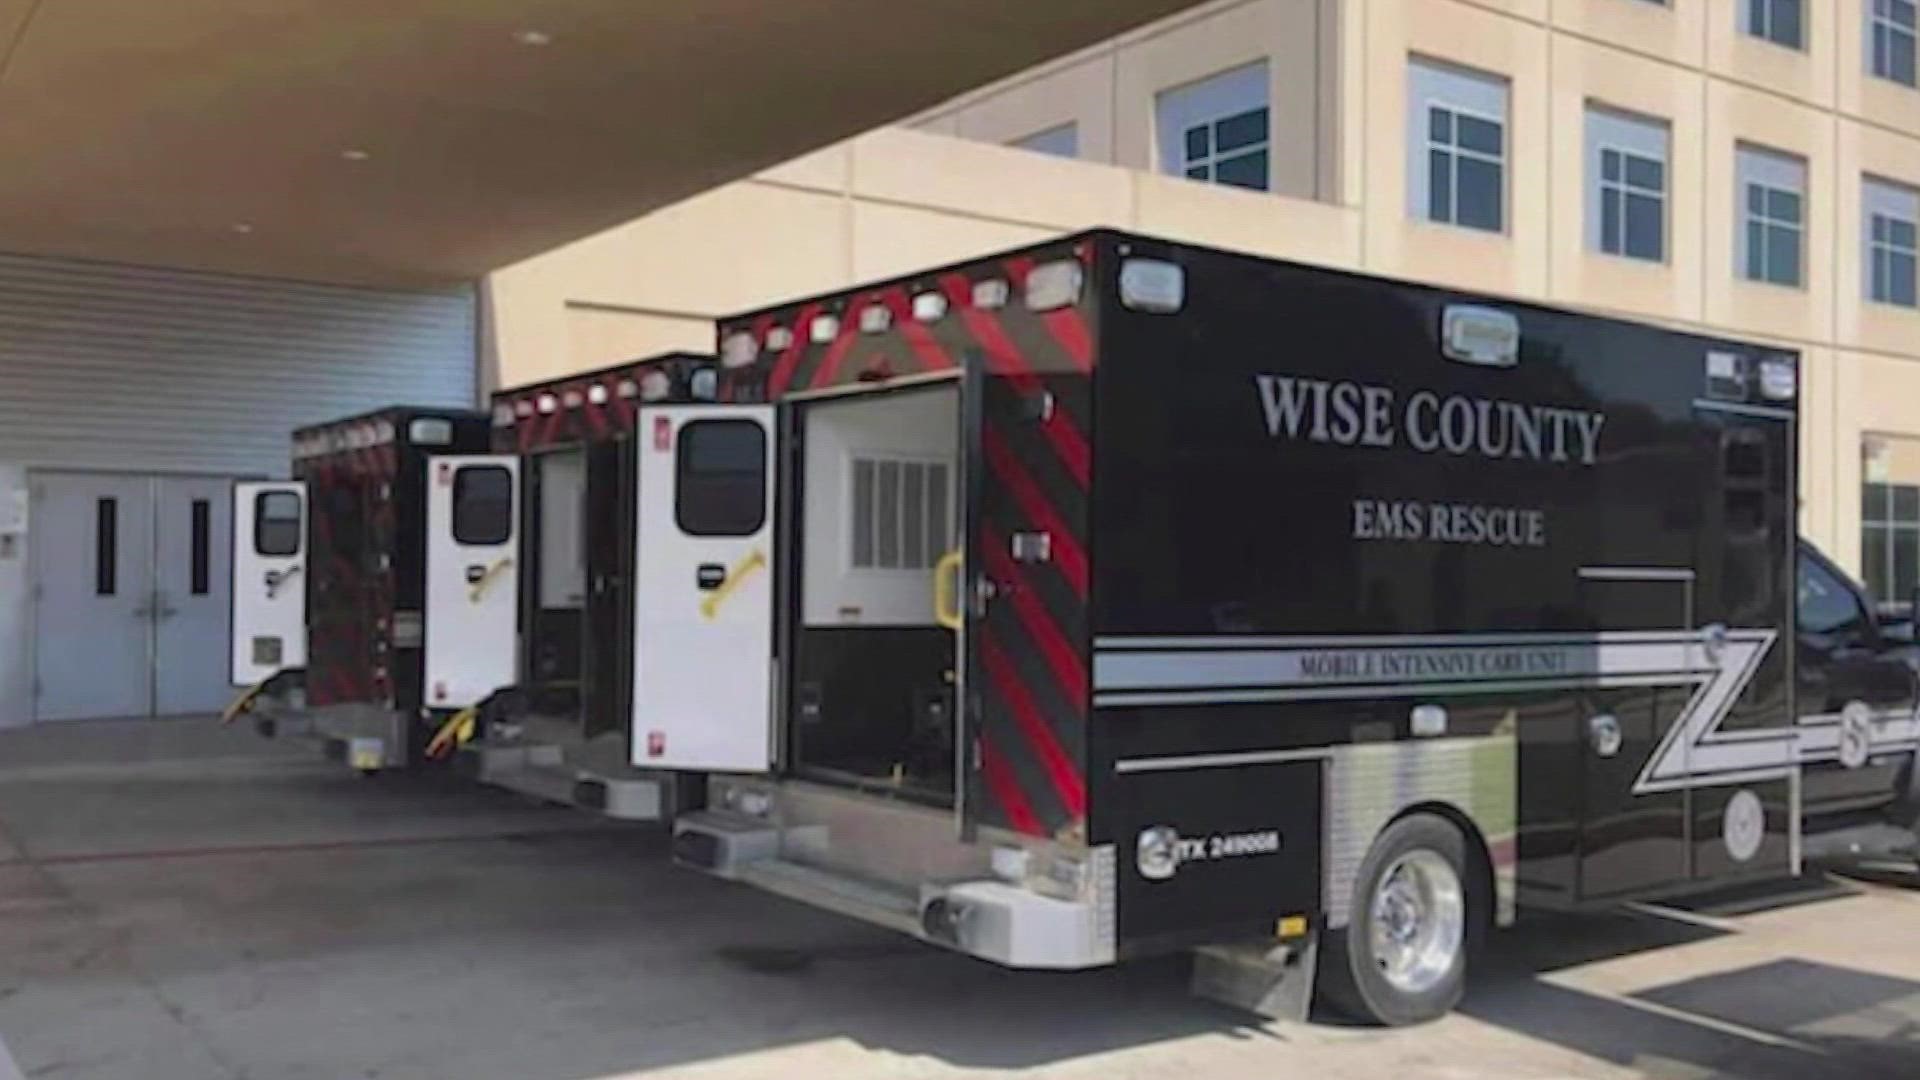 Wednesday, Wise Health System's Med/Surge/ICU capacity was at 100%. EMS officials in Wise County are also grappling with challenges amid COVID surge.